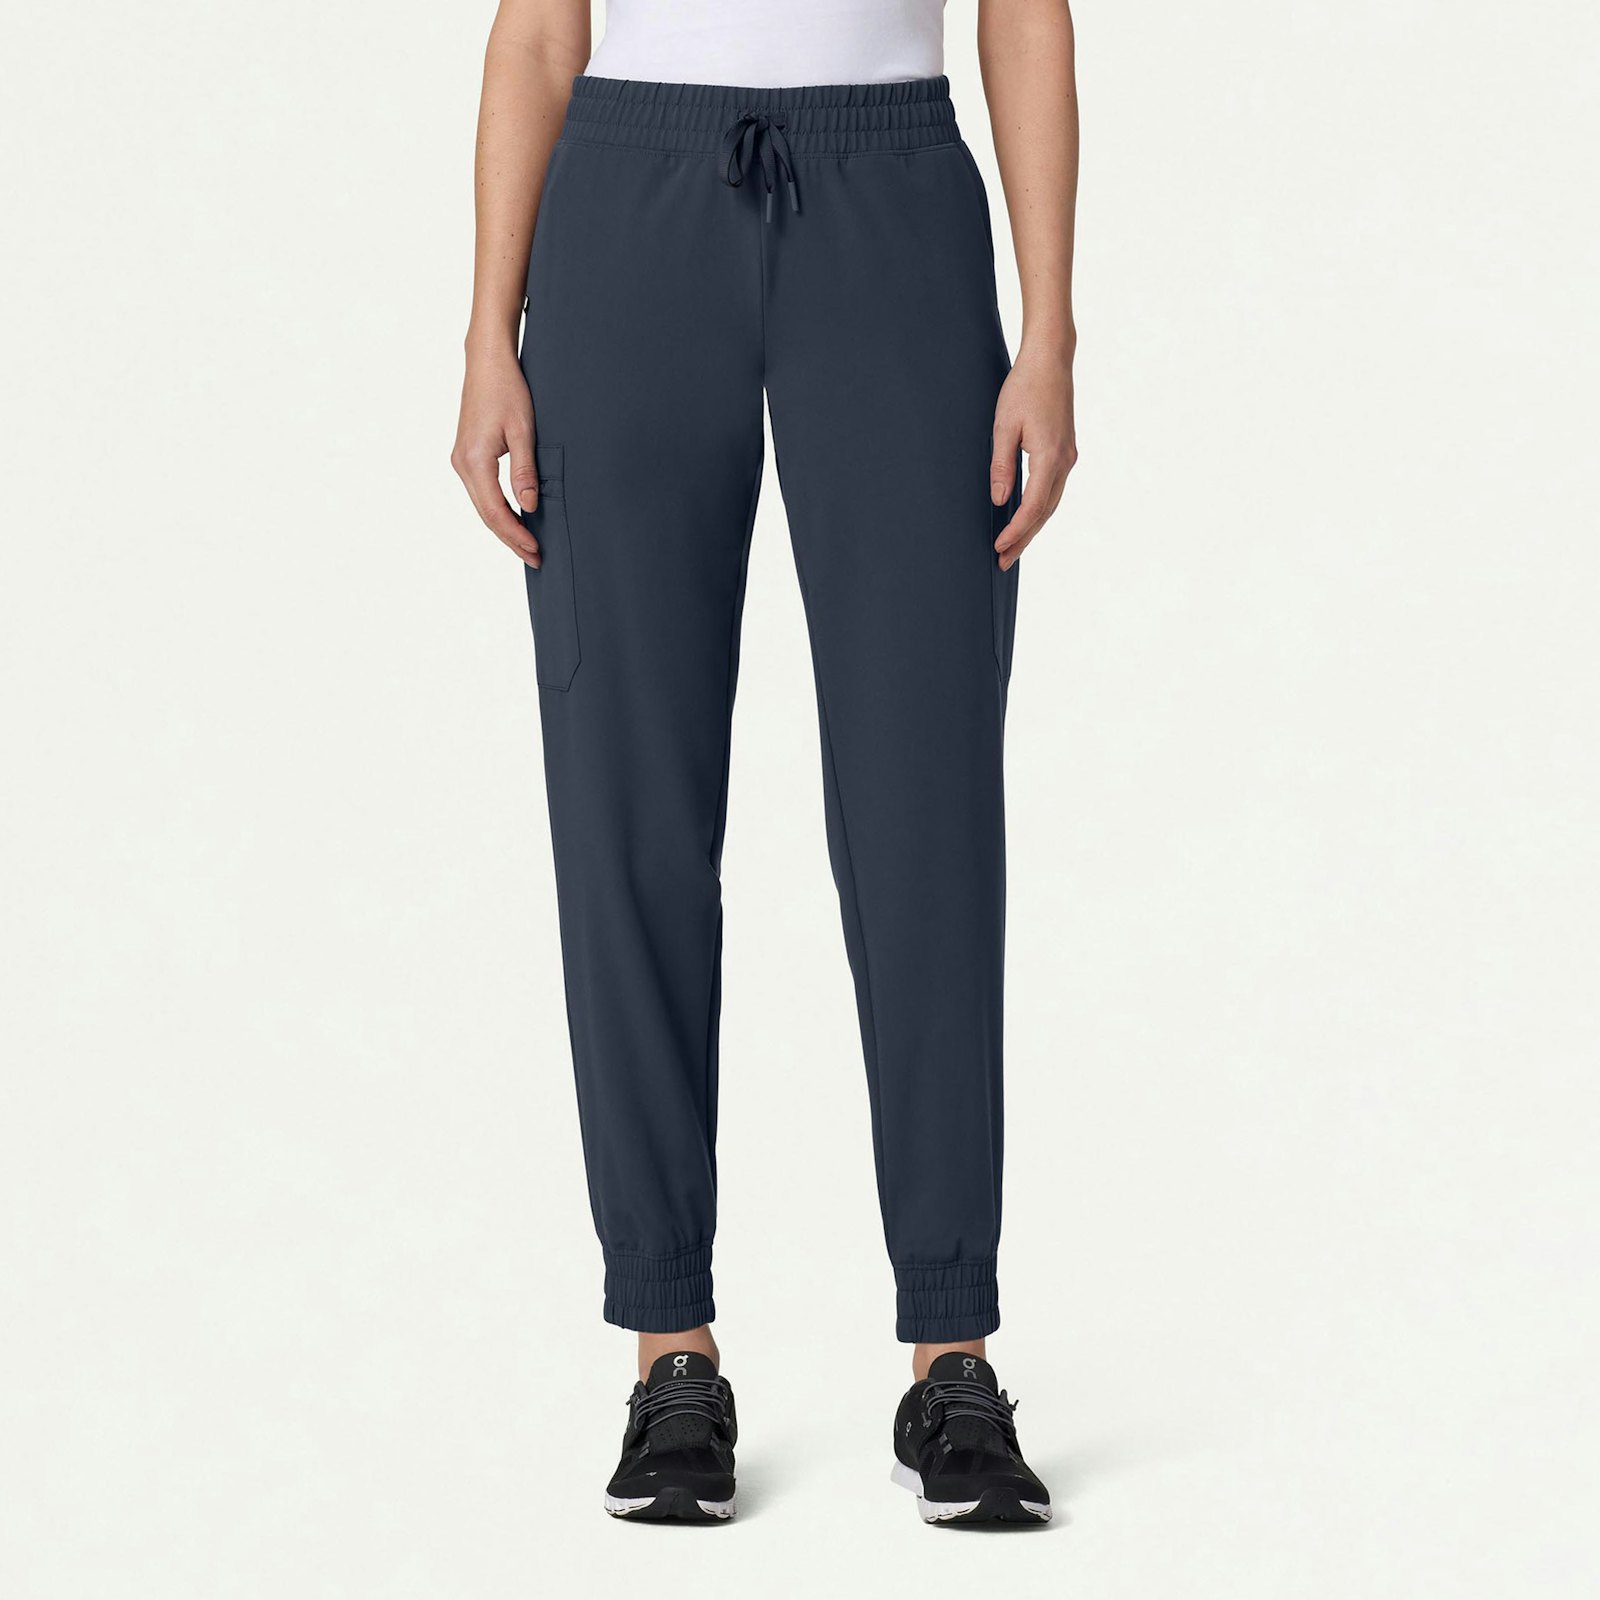 Xenos Classic Scrub Pant in Carbon Gray - Women's Pants by Jaanuu